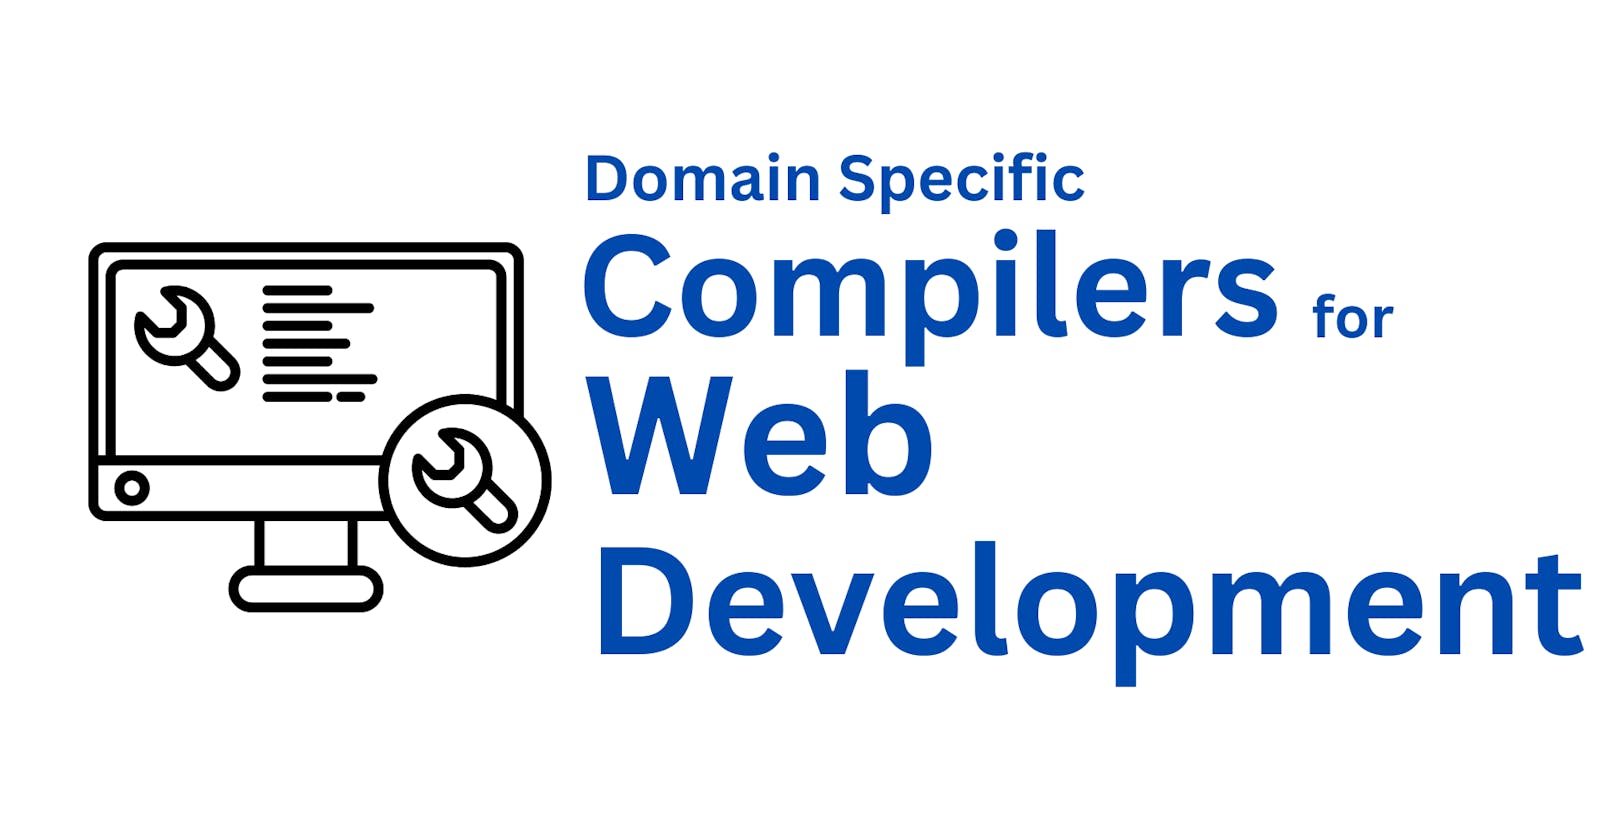 Domain Specific Compilers for Web Development